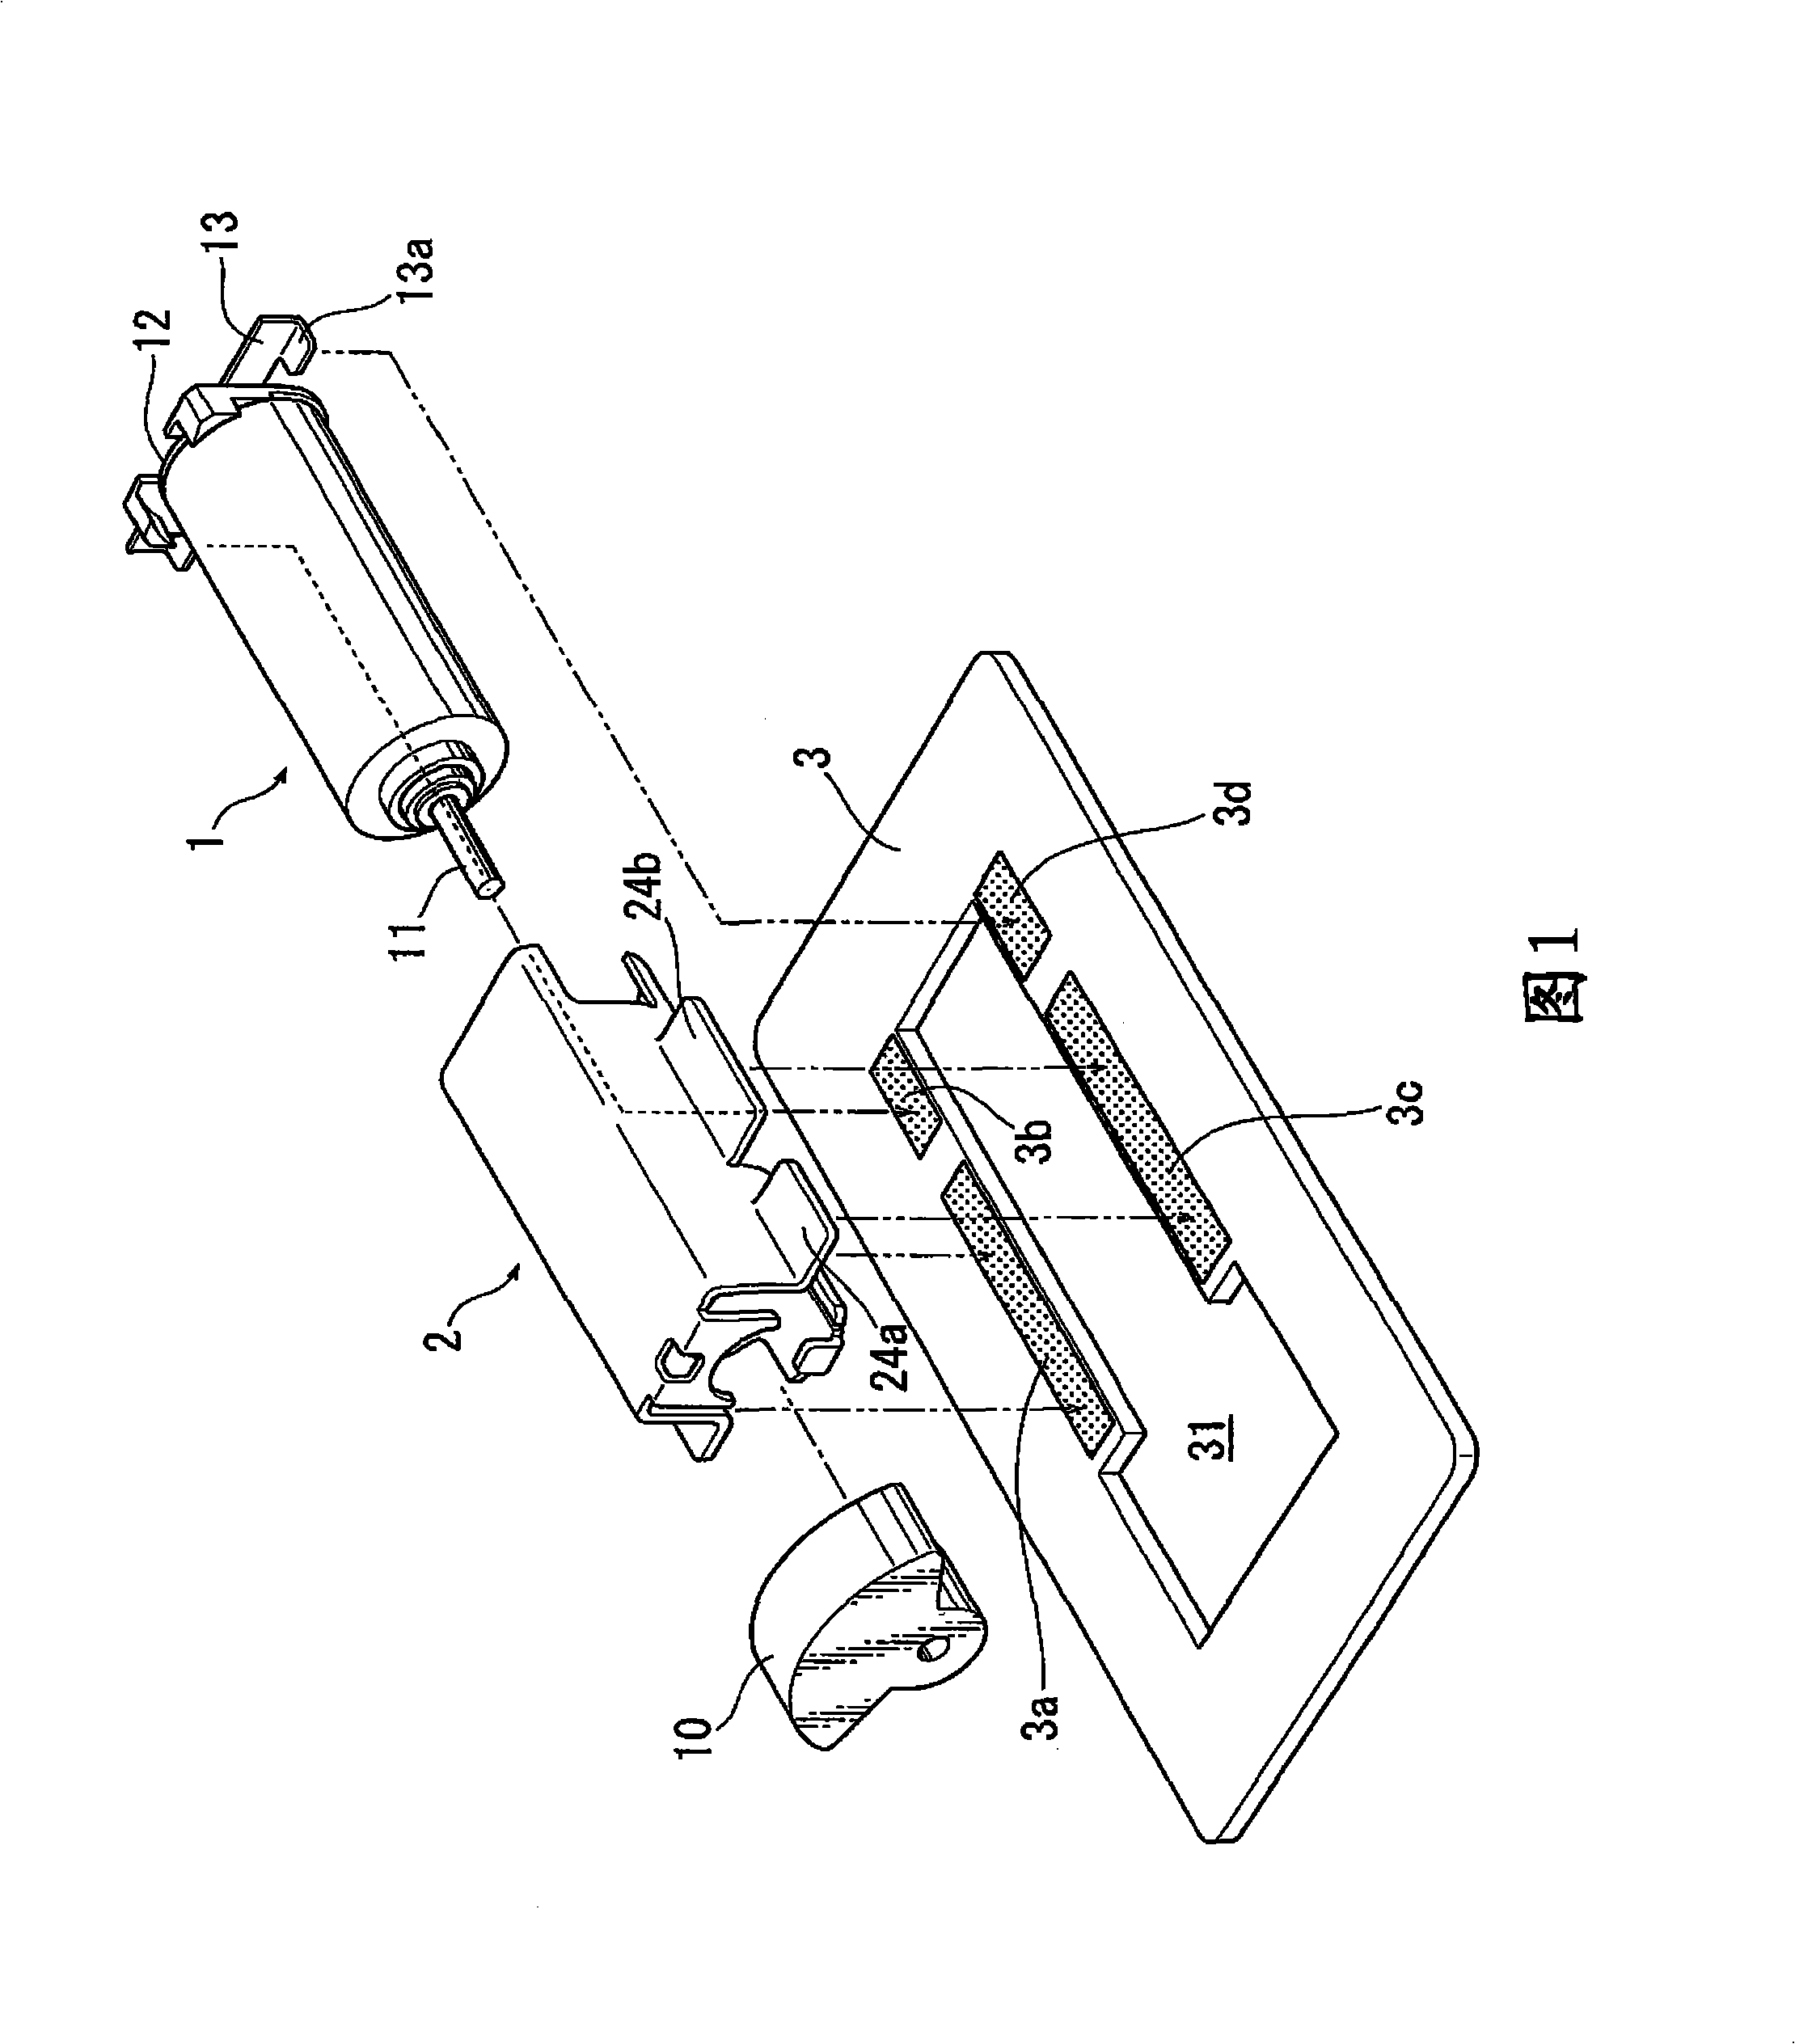 Vibration motor holding structure and vibration motor